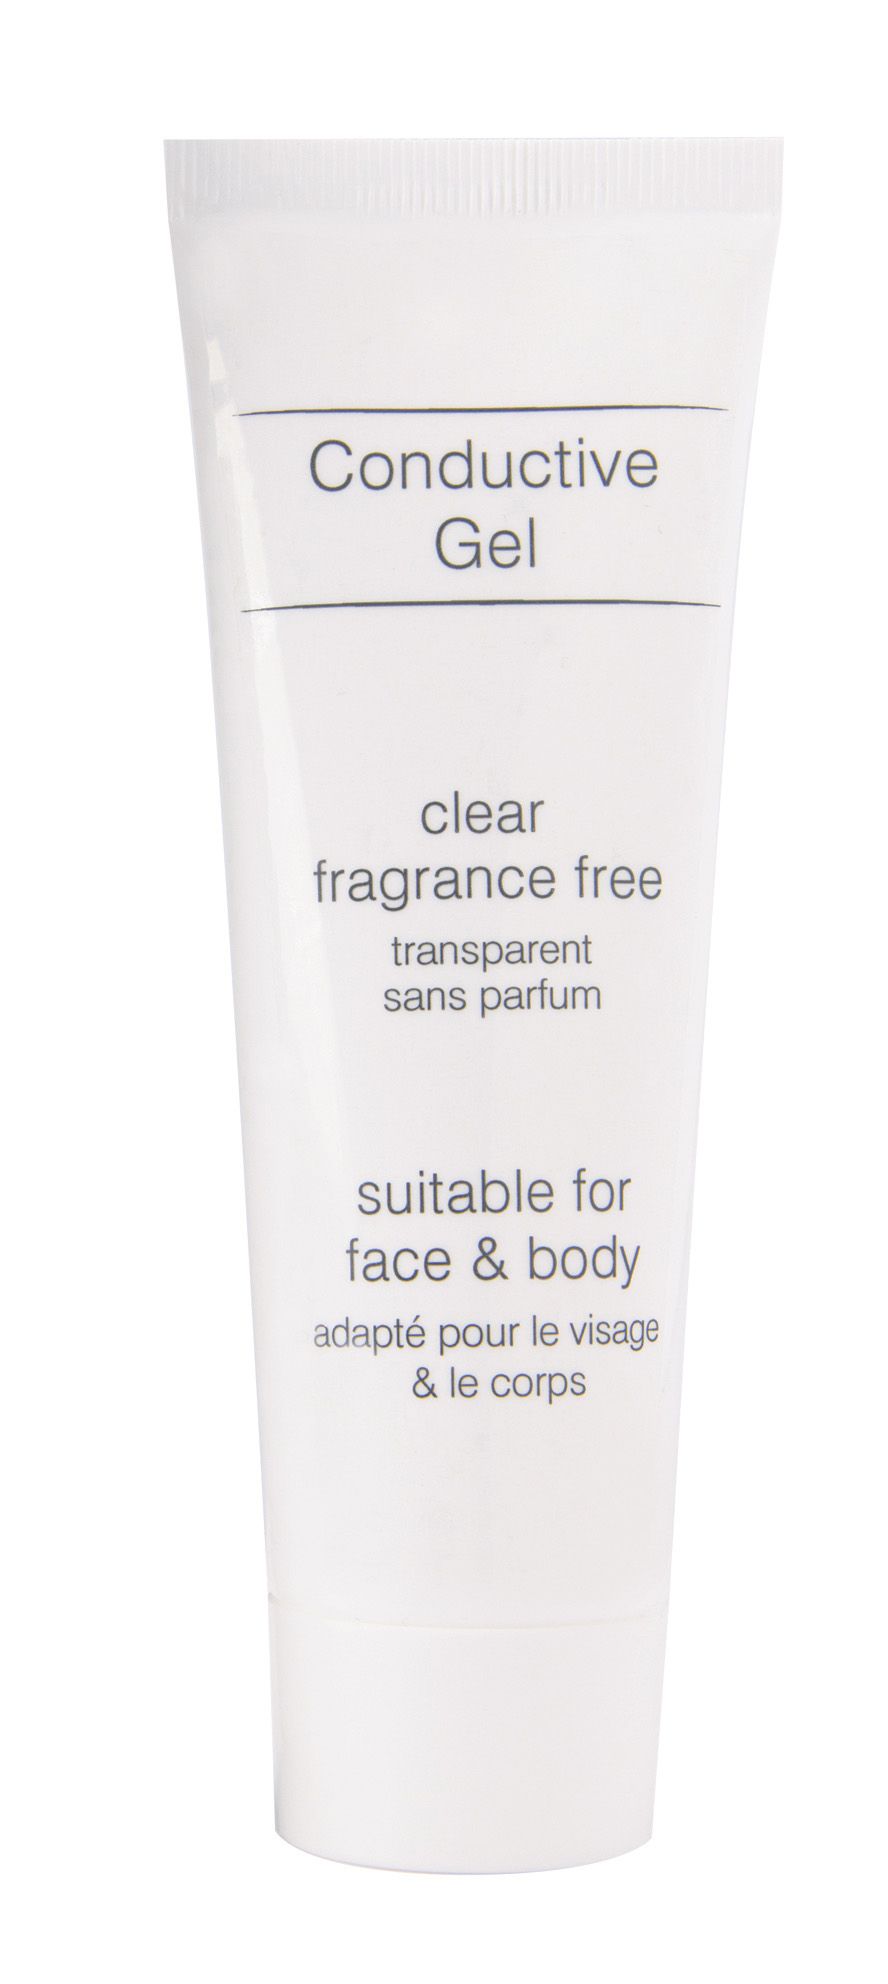 white 85ml tube of clear fragrance free conductive gel suitable for face and body